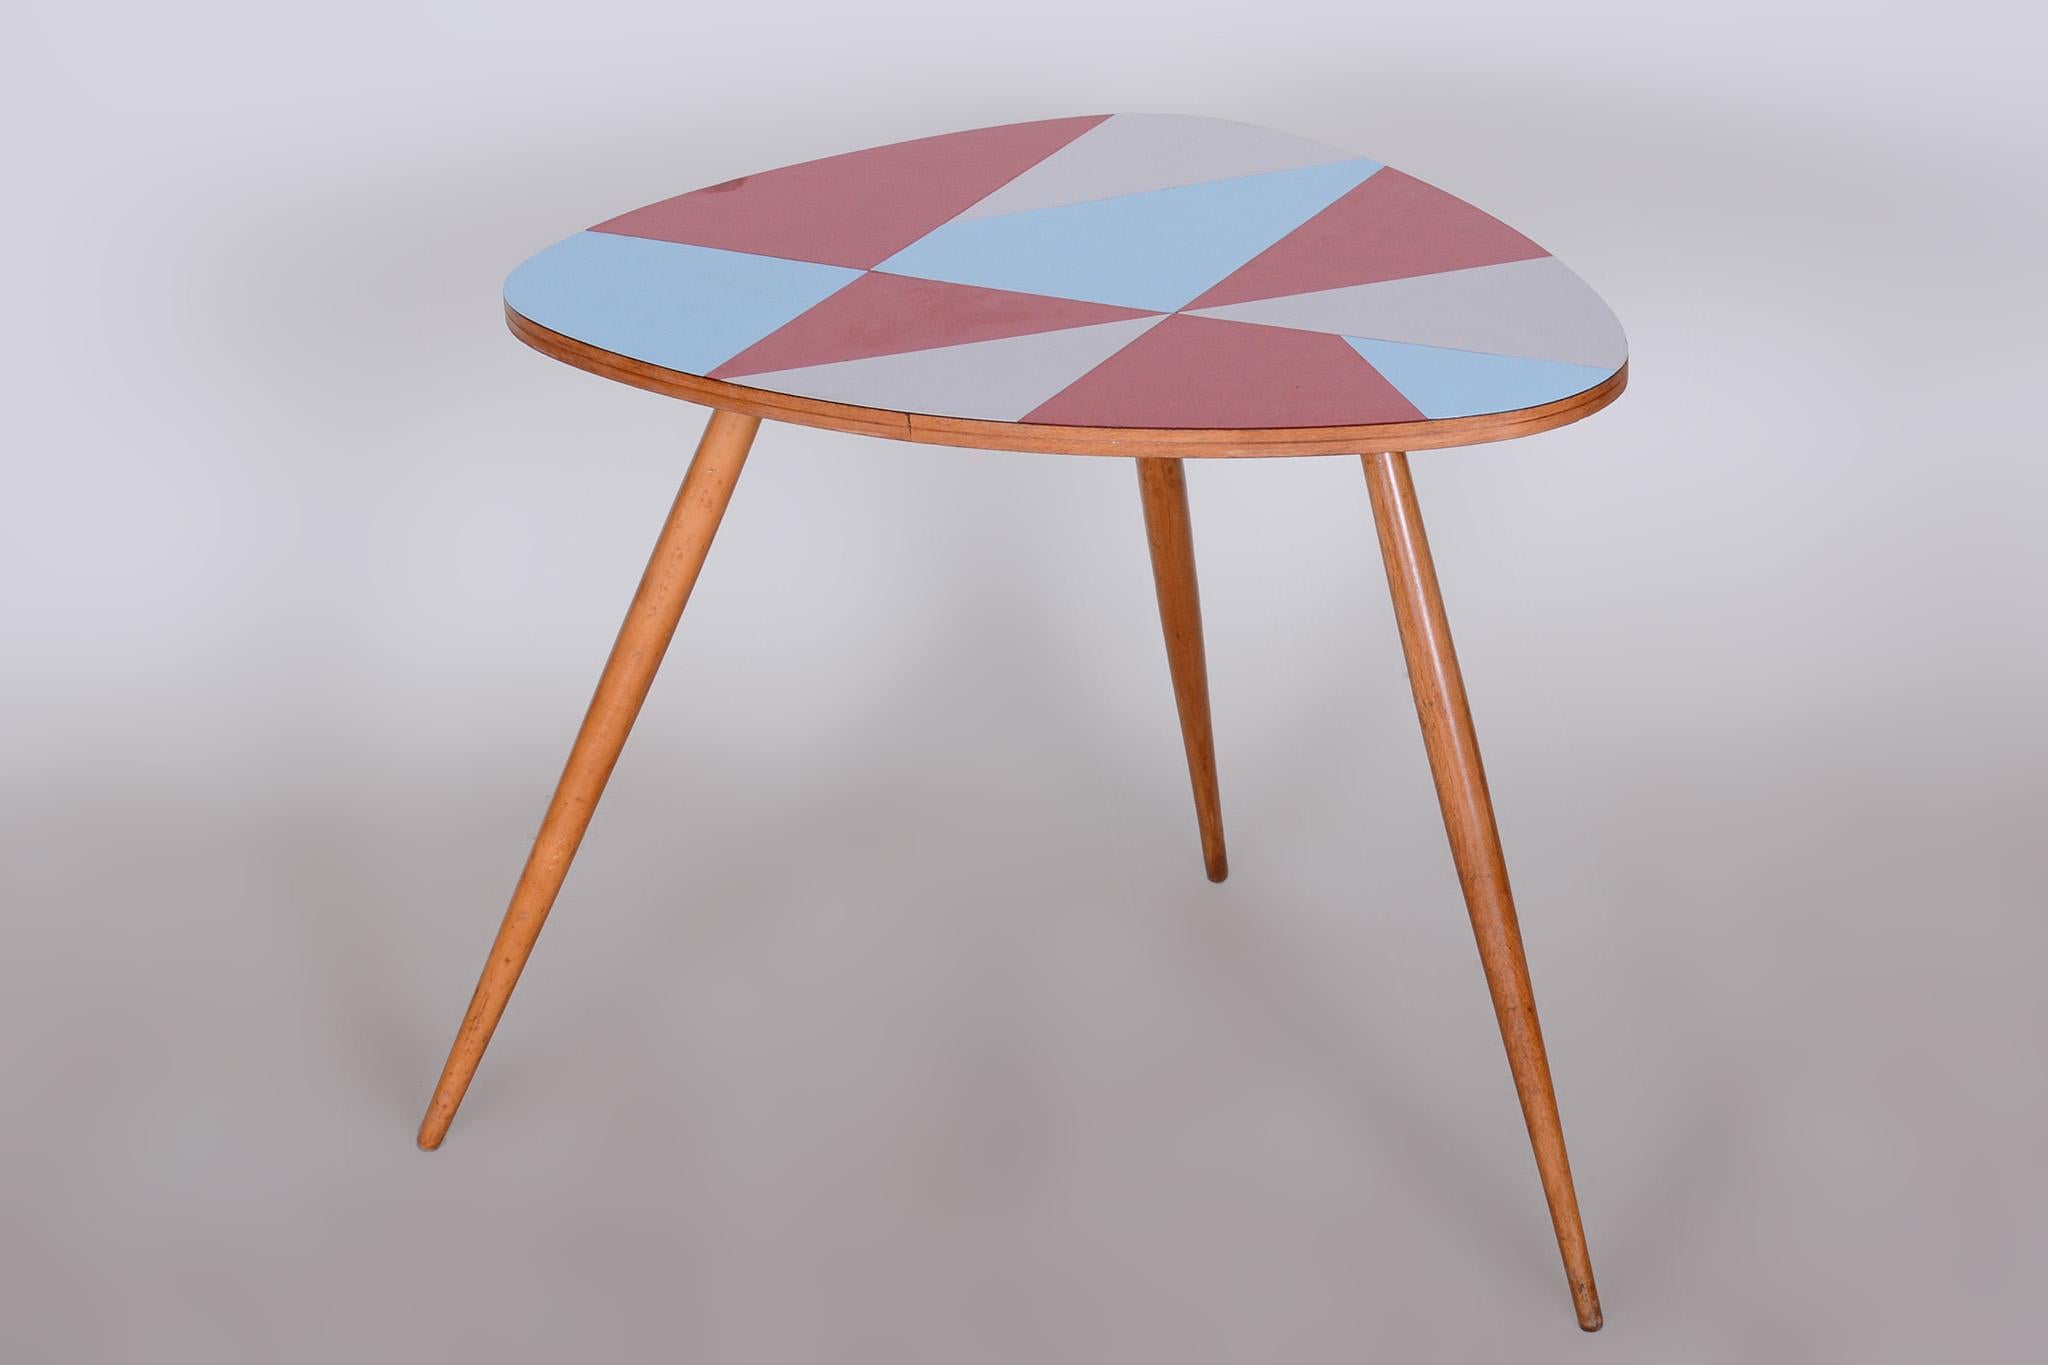 Small Restored Midcentury Table, Beech and Umakart, Czechia, 1950s For Sale 1